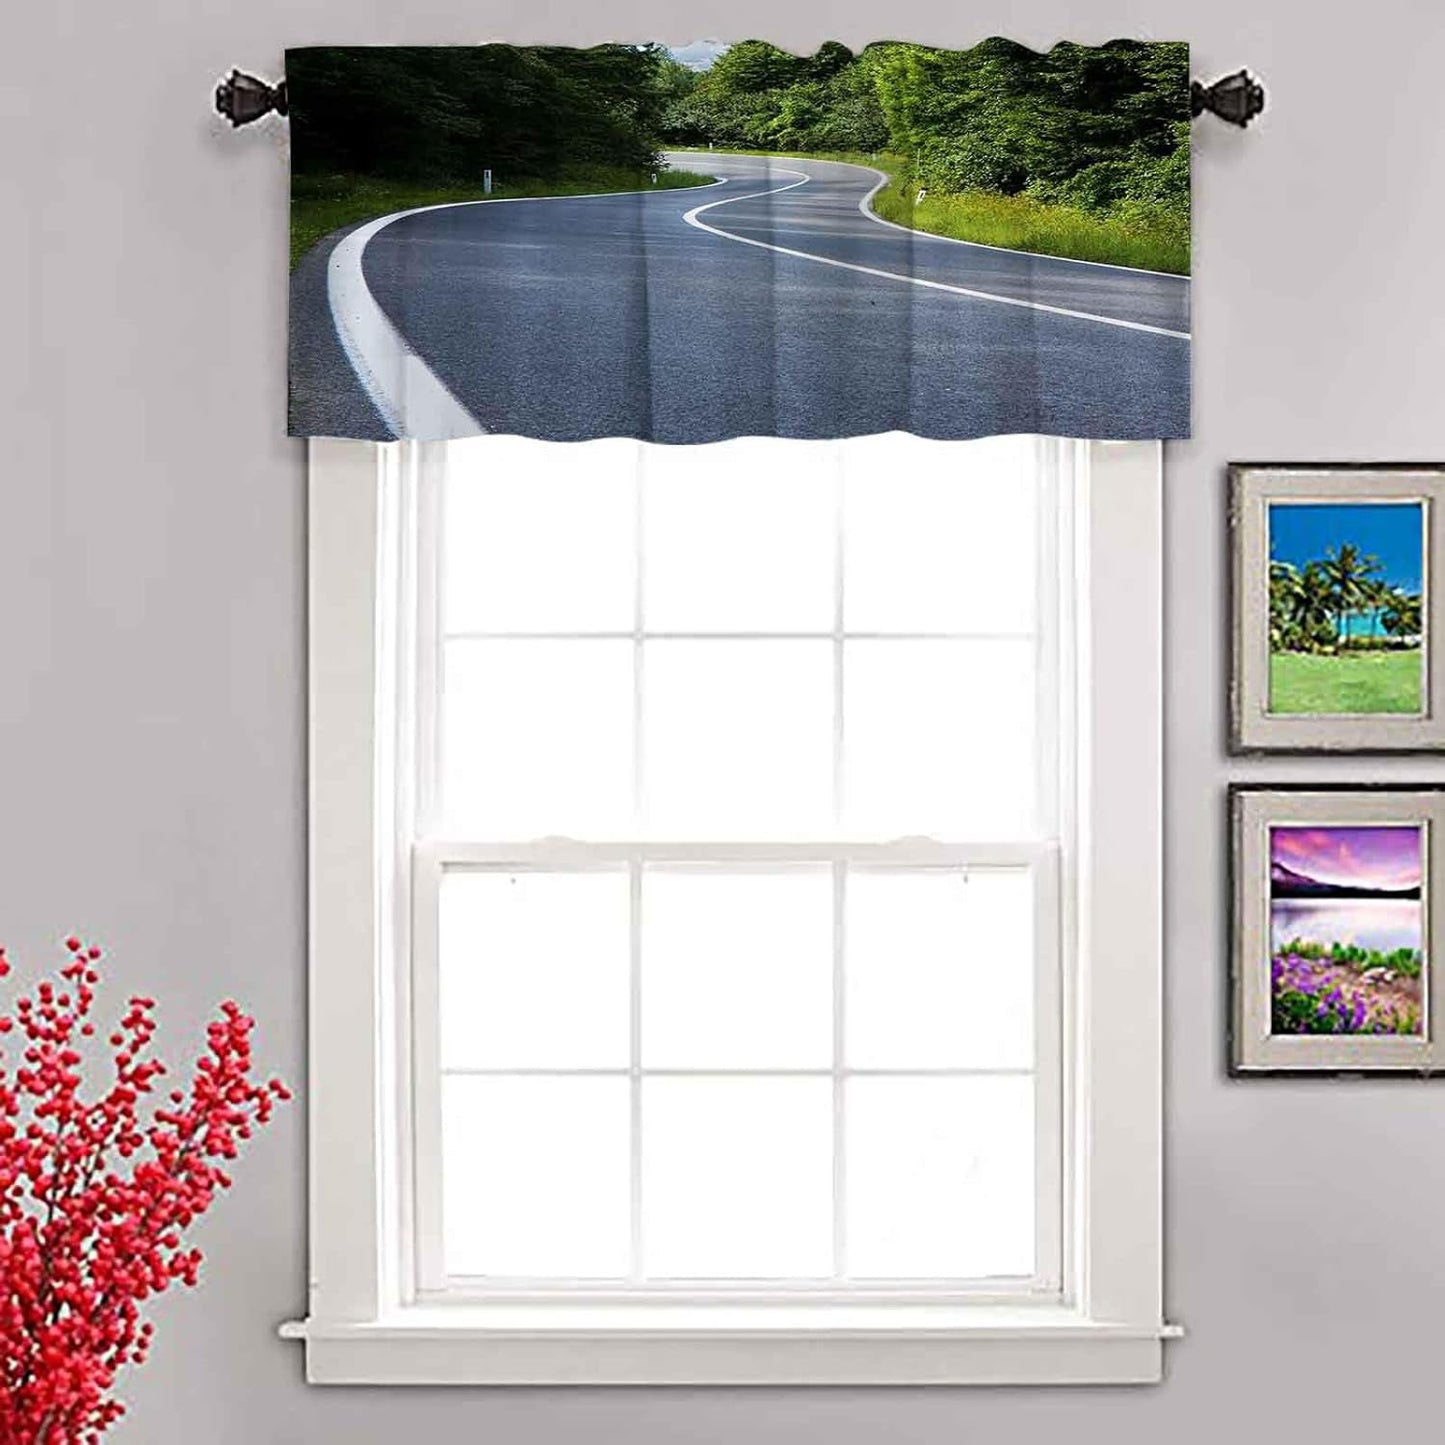 Blackout Valance Straight Asphalt Road Leading into Distance Valance 52X18 Inches Window Valance for Bedroom